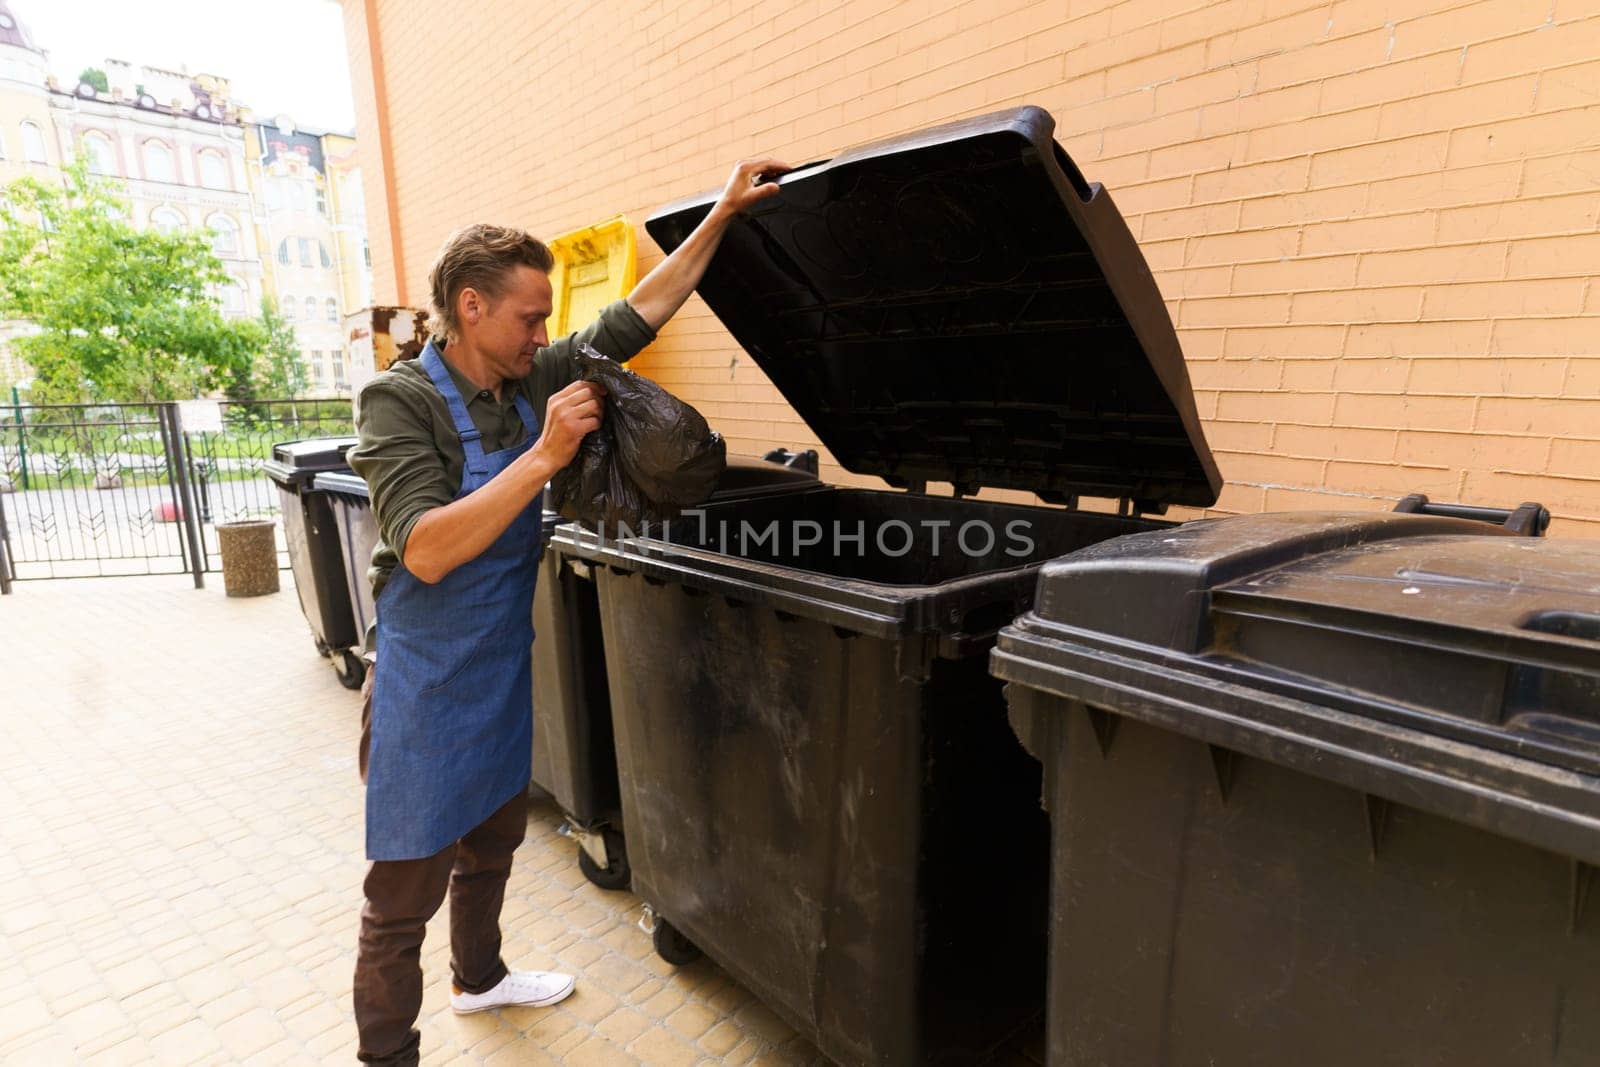 Waiter or kitchen worker responsibly disposing of garbage in pocket and placing it in city trash bin located in back yard. Focus on maintaining cleanliness and proper waste management in urban environment. by LipikStockMedia